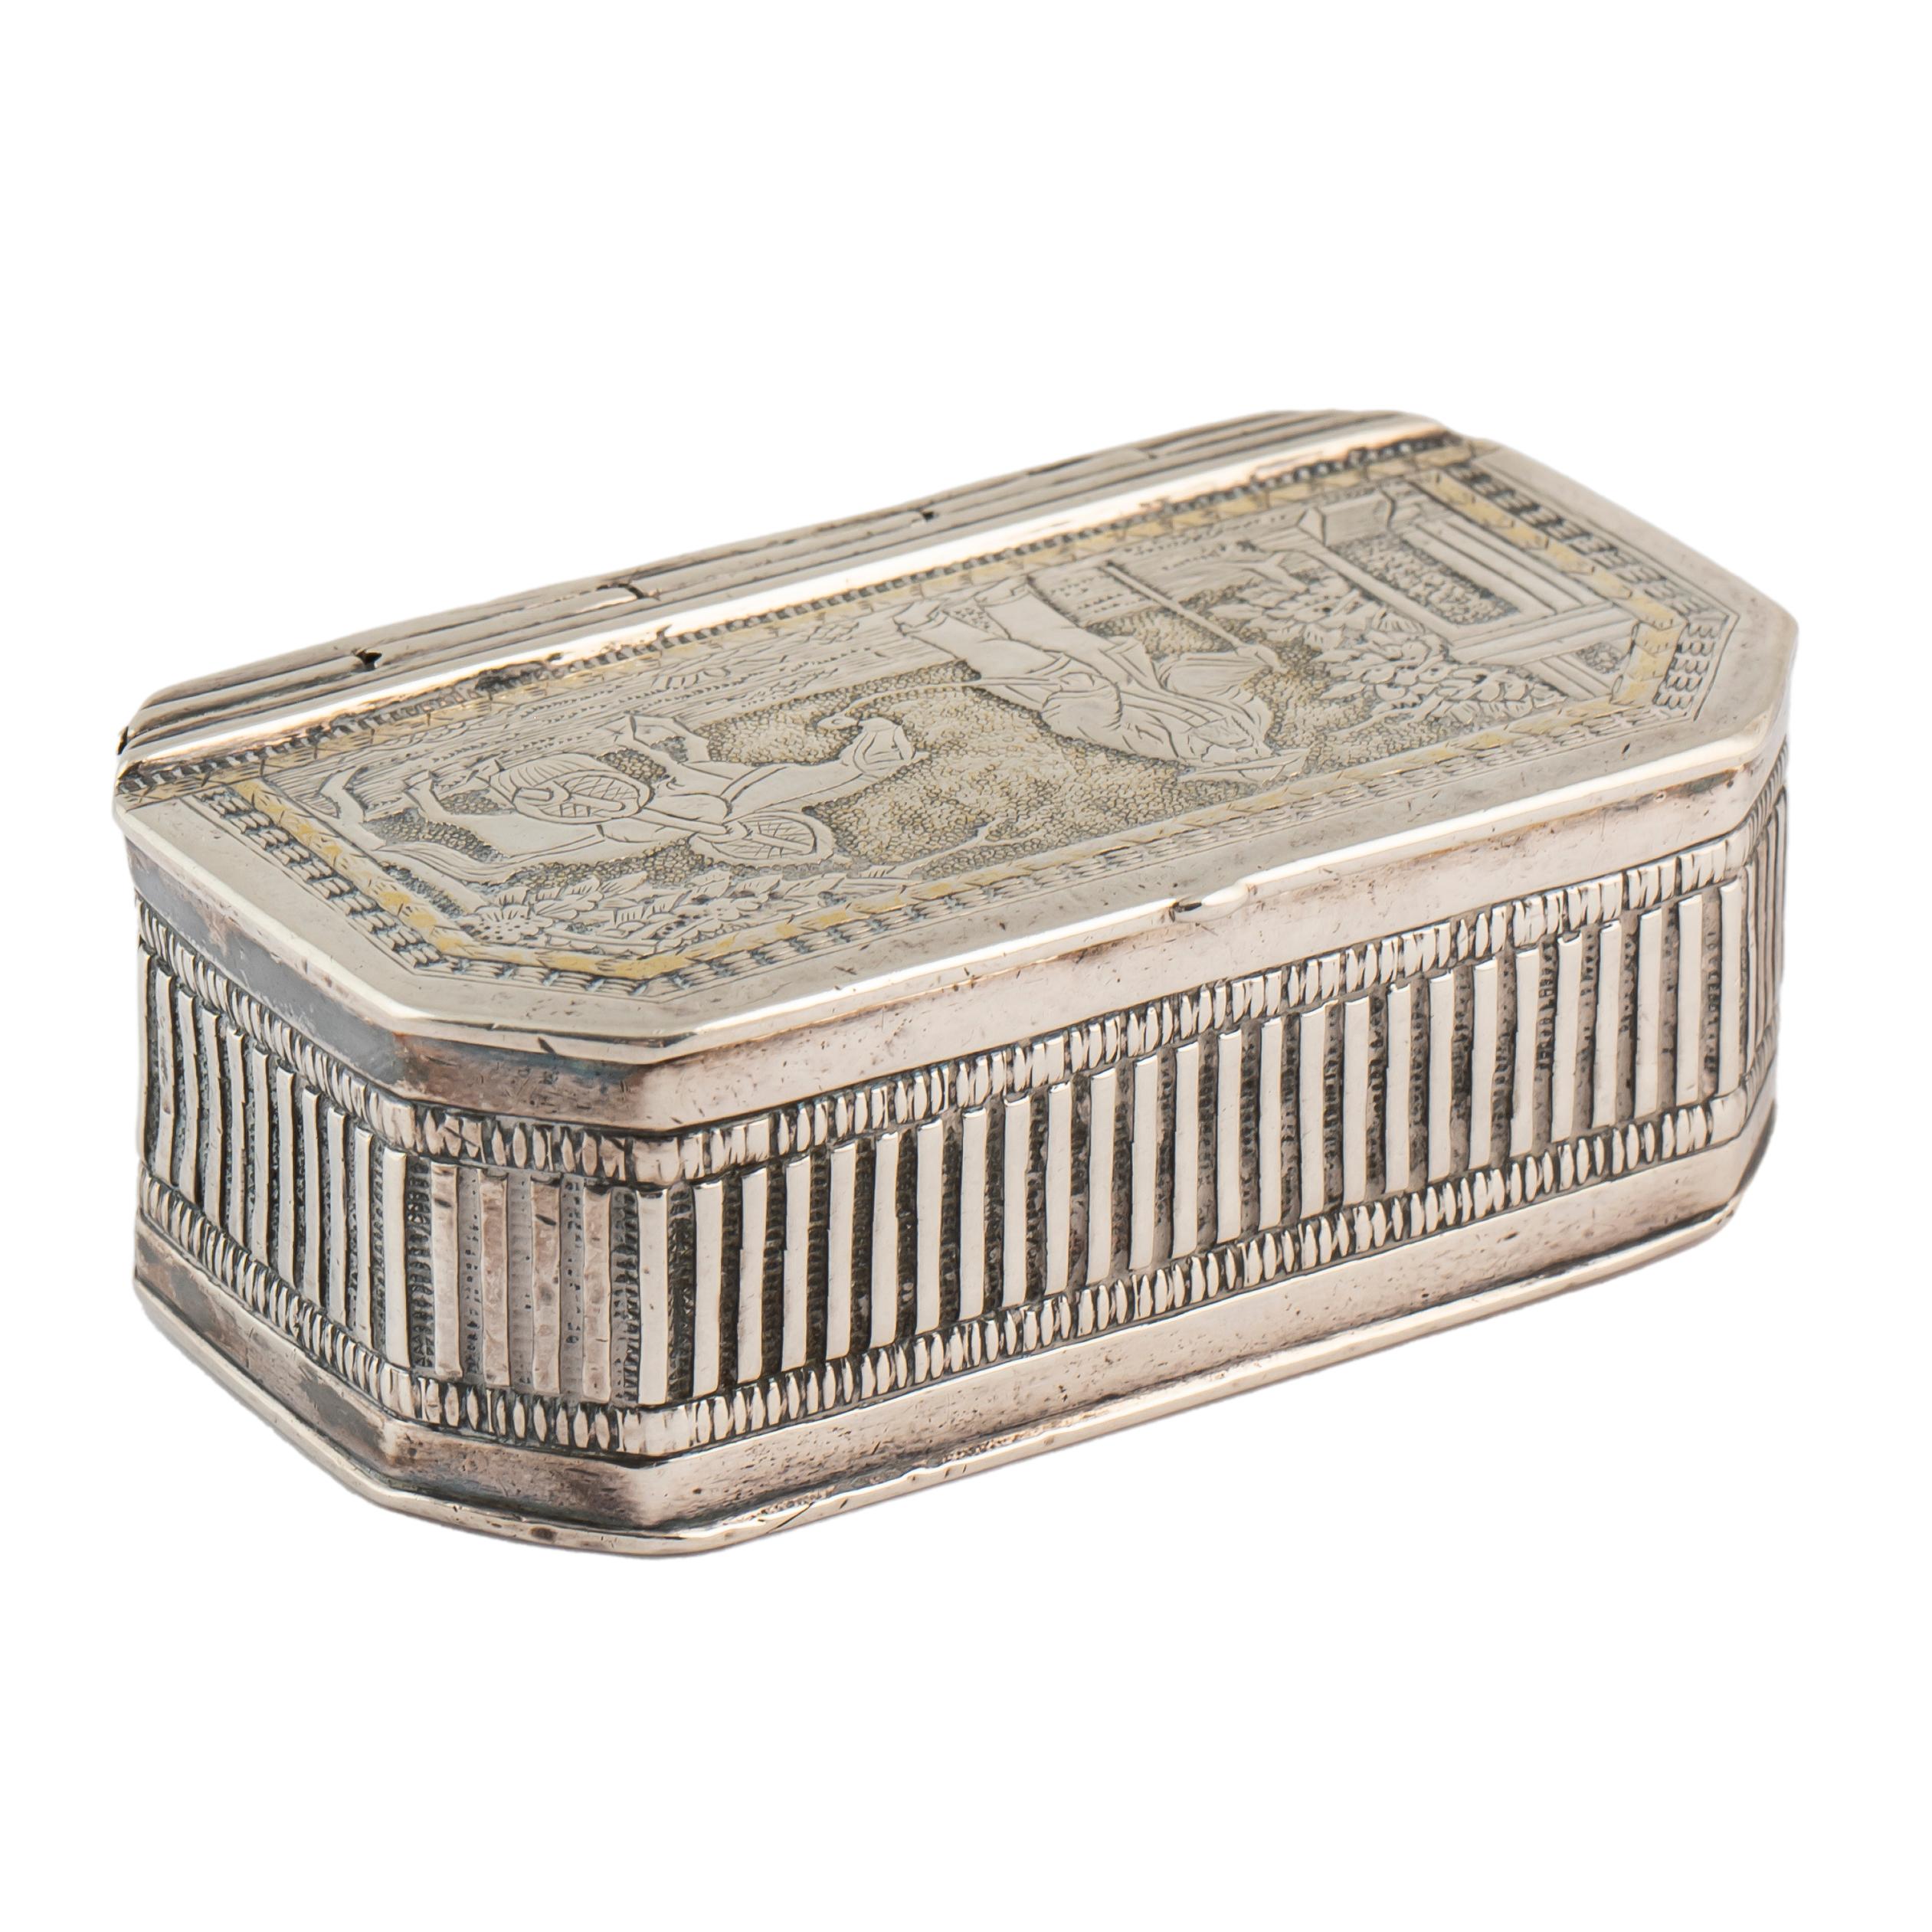 A heavy silver box with canted corners, the hinged cover in the style of an ancient traditional woodcut featuring a Chinese traveling figure or salesman with a walking stick in one hand, the other leading his horse burdened with baskets to a porch